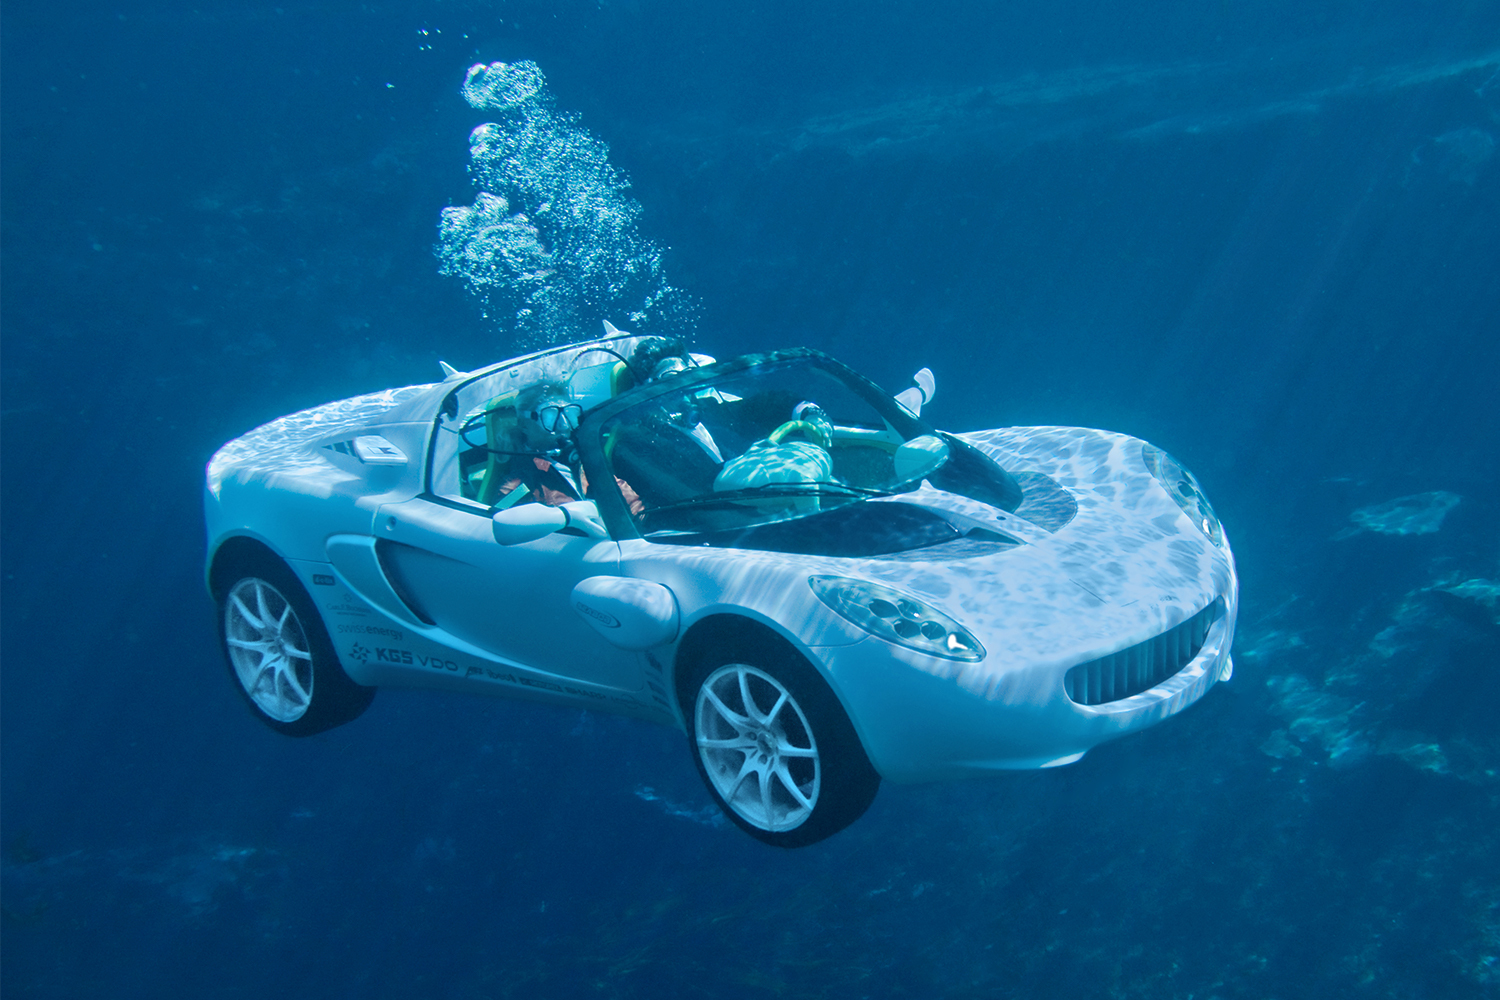 The sQuba aquatic car from Rinspeed, shown here with the passengers wearing scuba gear and the car underwater